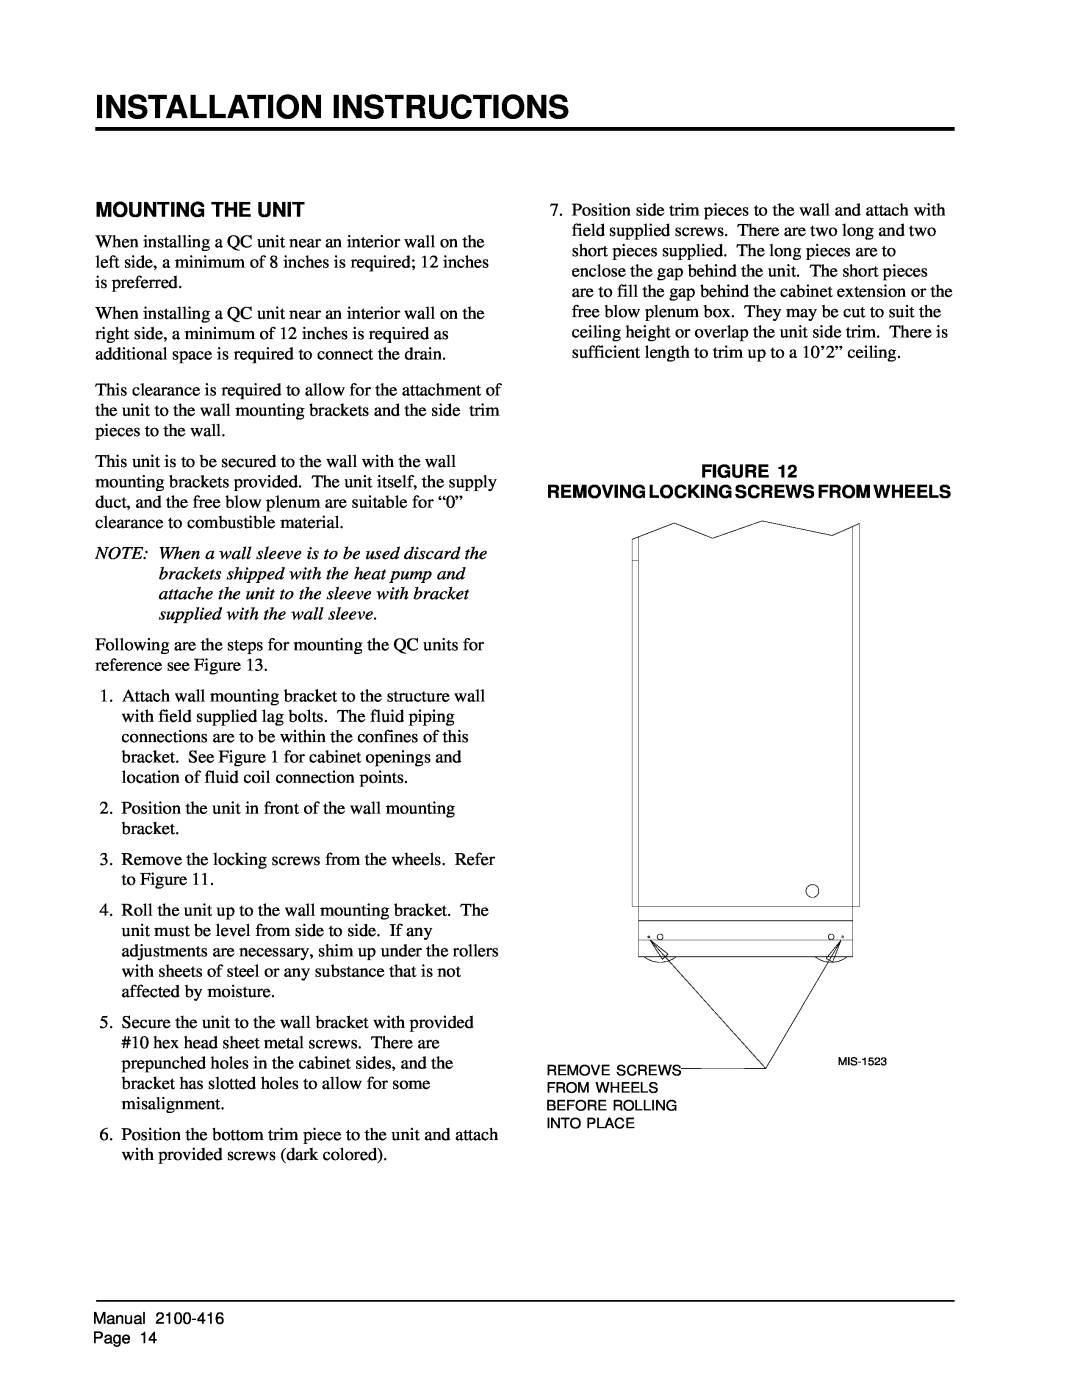 Bard QC501 Installation Instructions, Mounting The Unit, Figure Removing Locking Screws From Wheels 